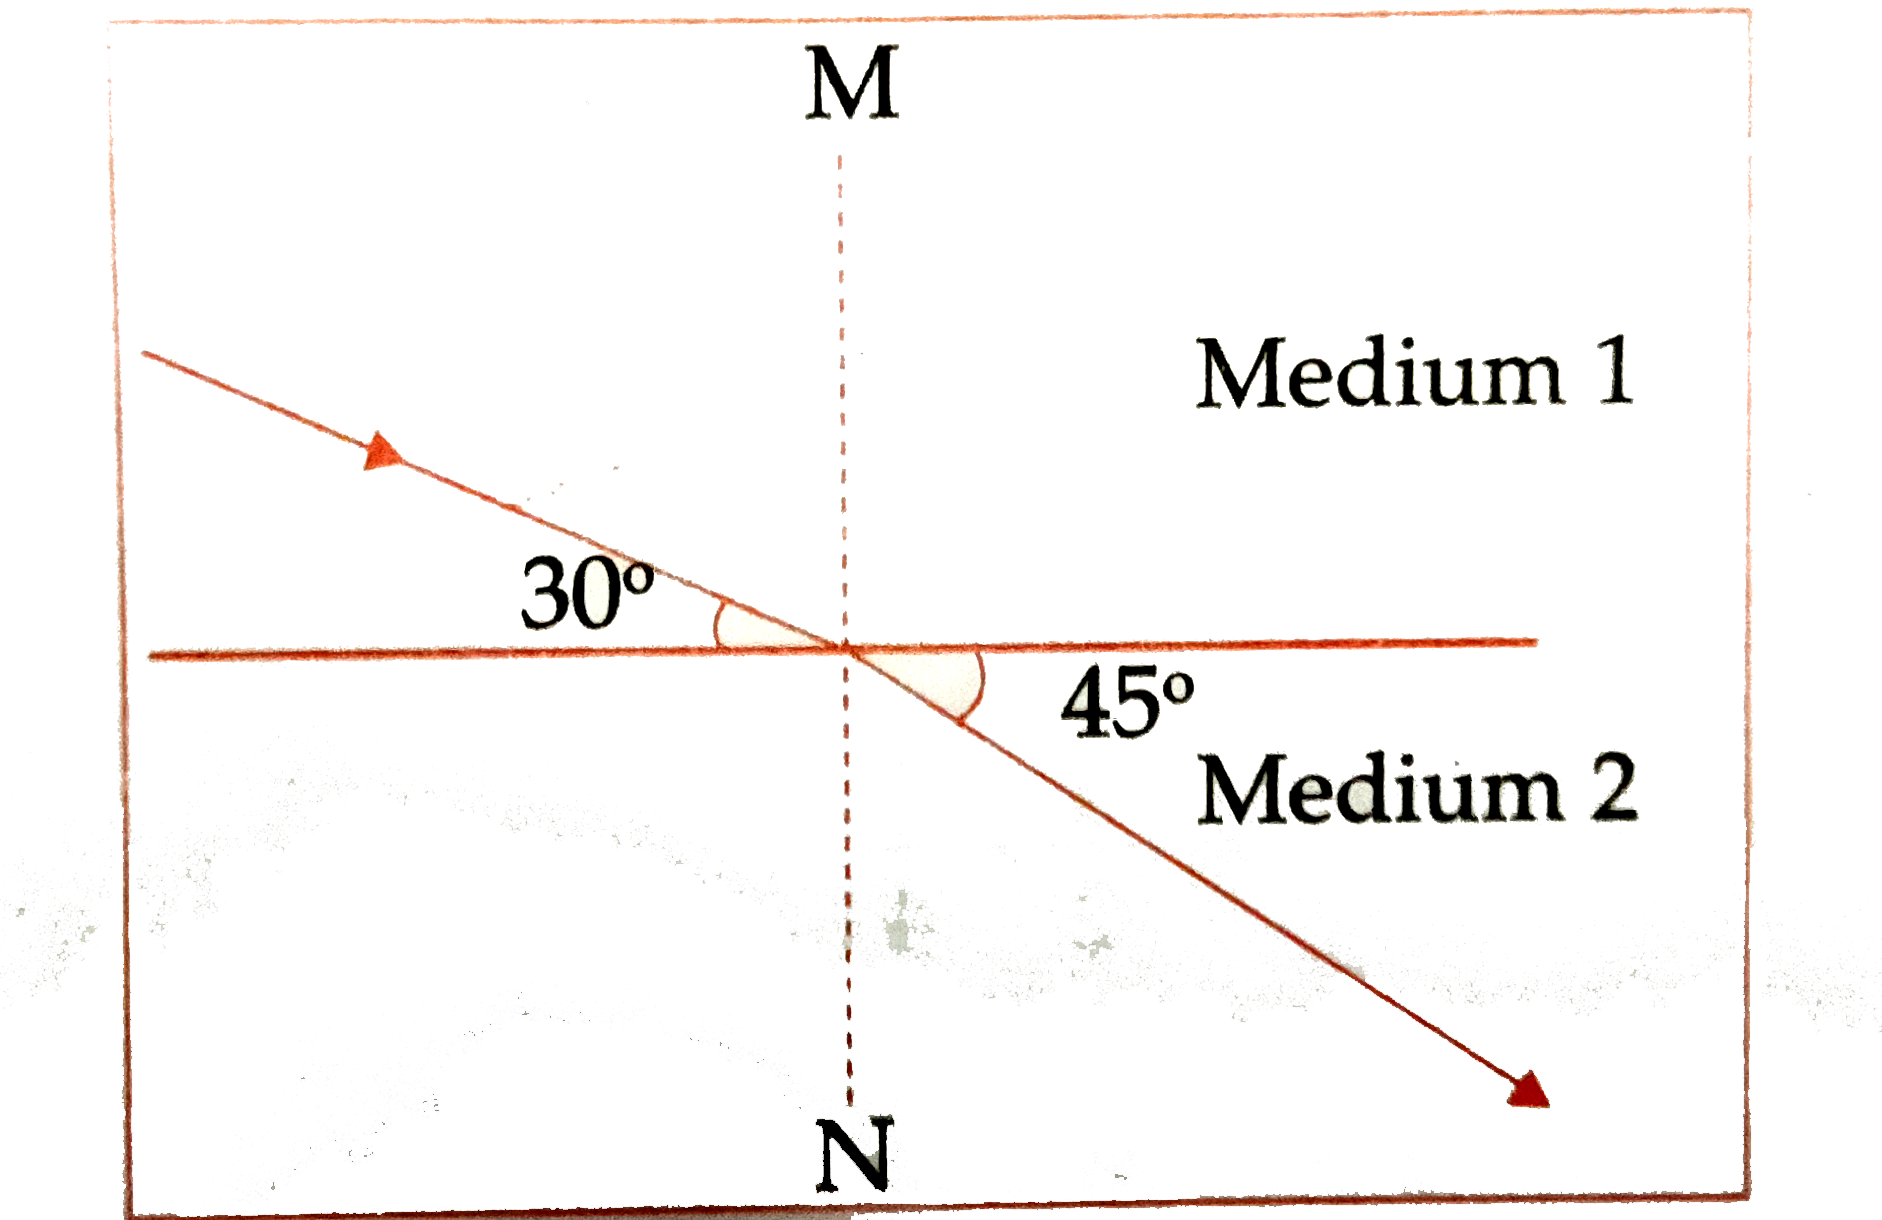 The figure shows the path of ray of light propagating from medium 1 to medium 2. The refractive index of medium 1 with respect to medium 2 is …………………………. .